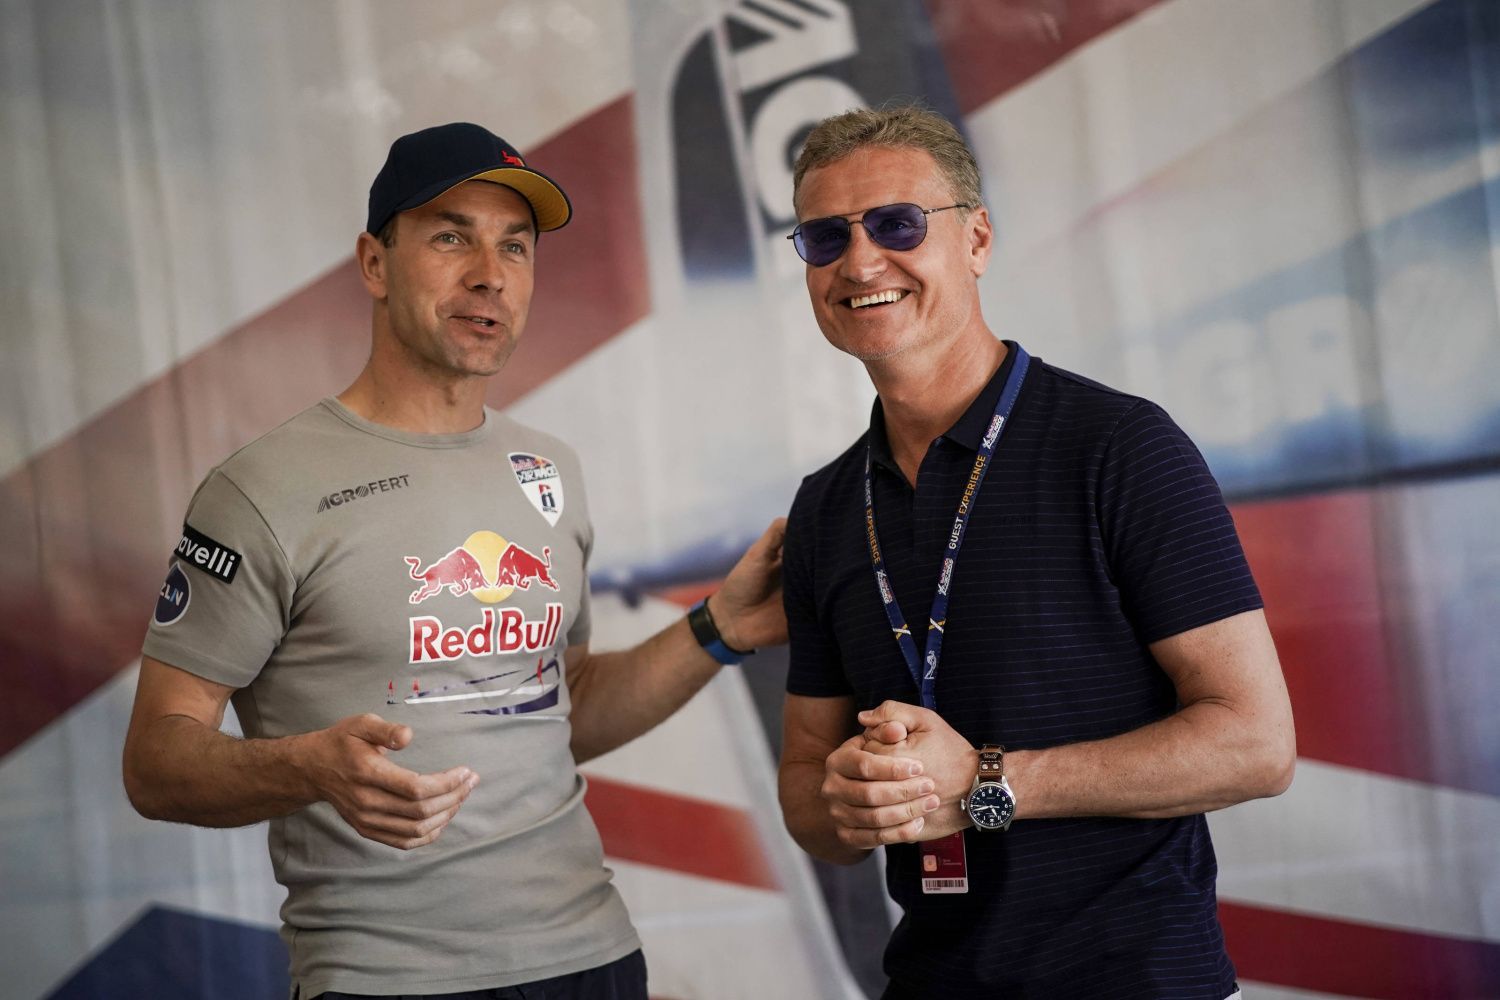 Red Bull Air Race Cannes 2018: Martin Šonka a David Coulthard